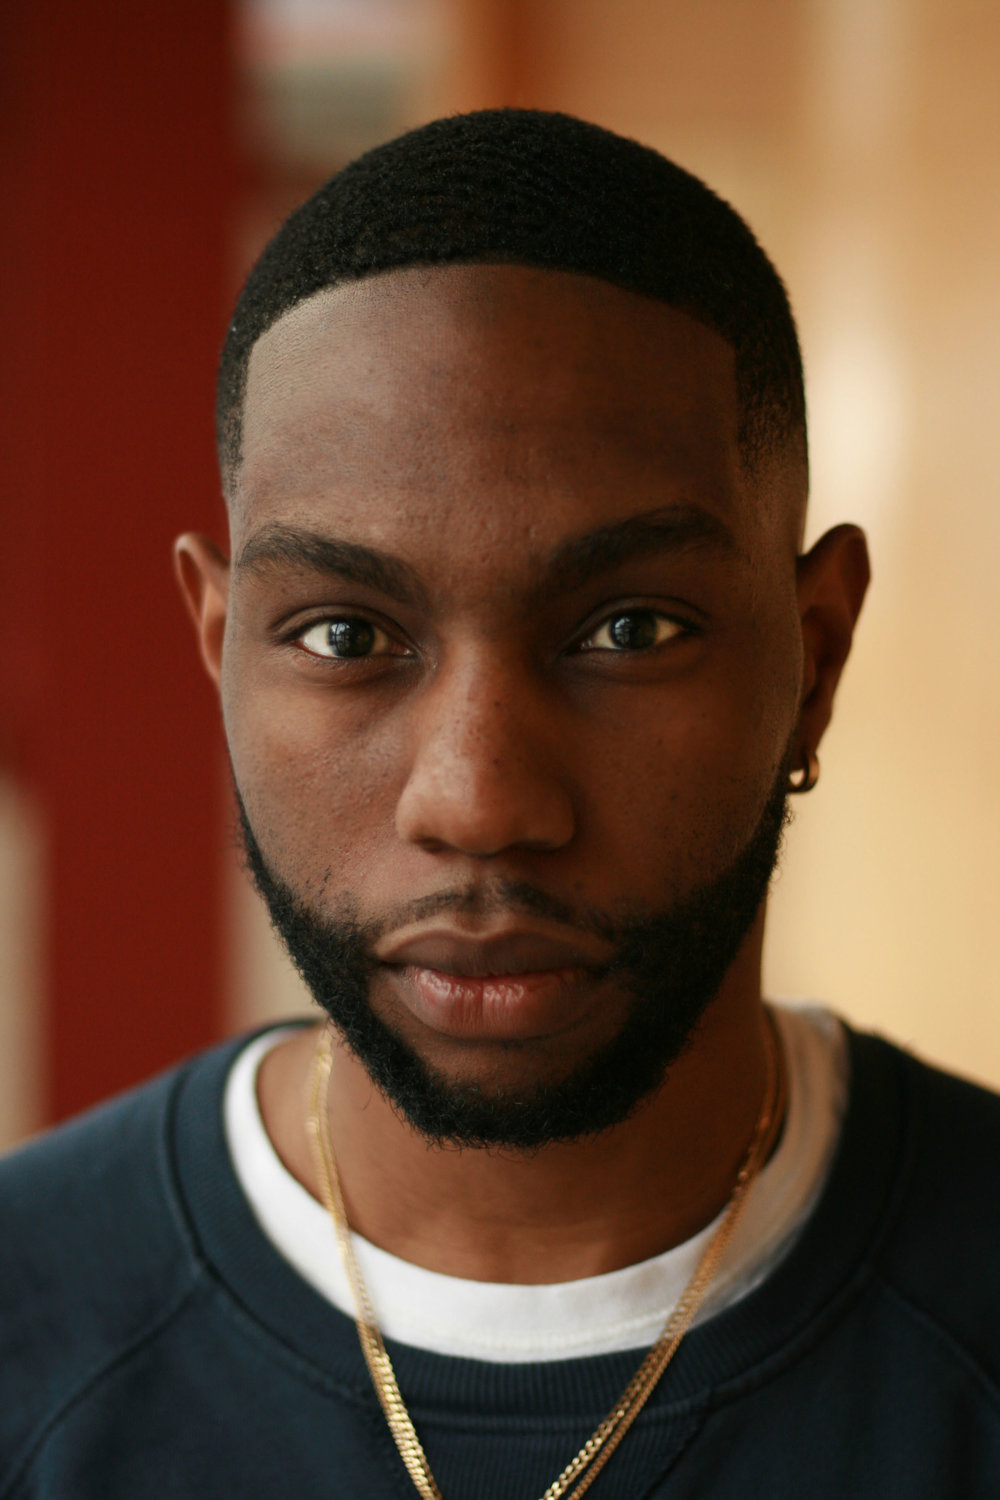 A close up portrait of Steven with the background out of focus. He has a gold hoop earing in his left ear, is wearing two gold chains and a black sweater.